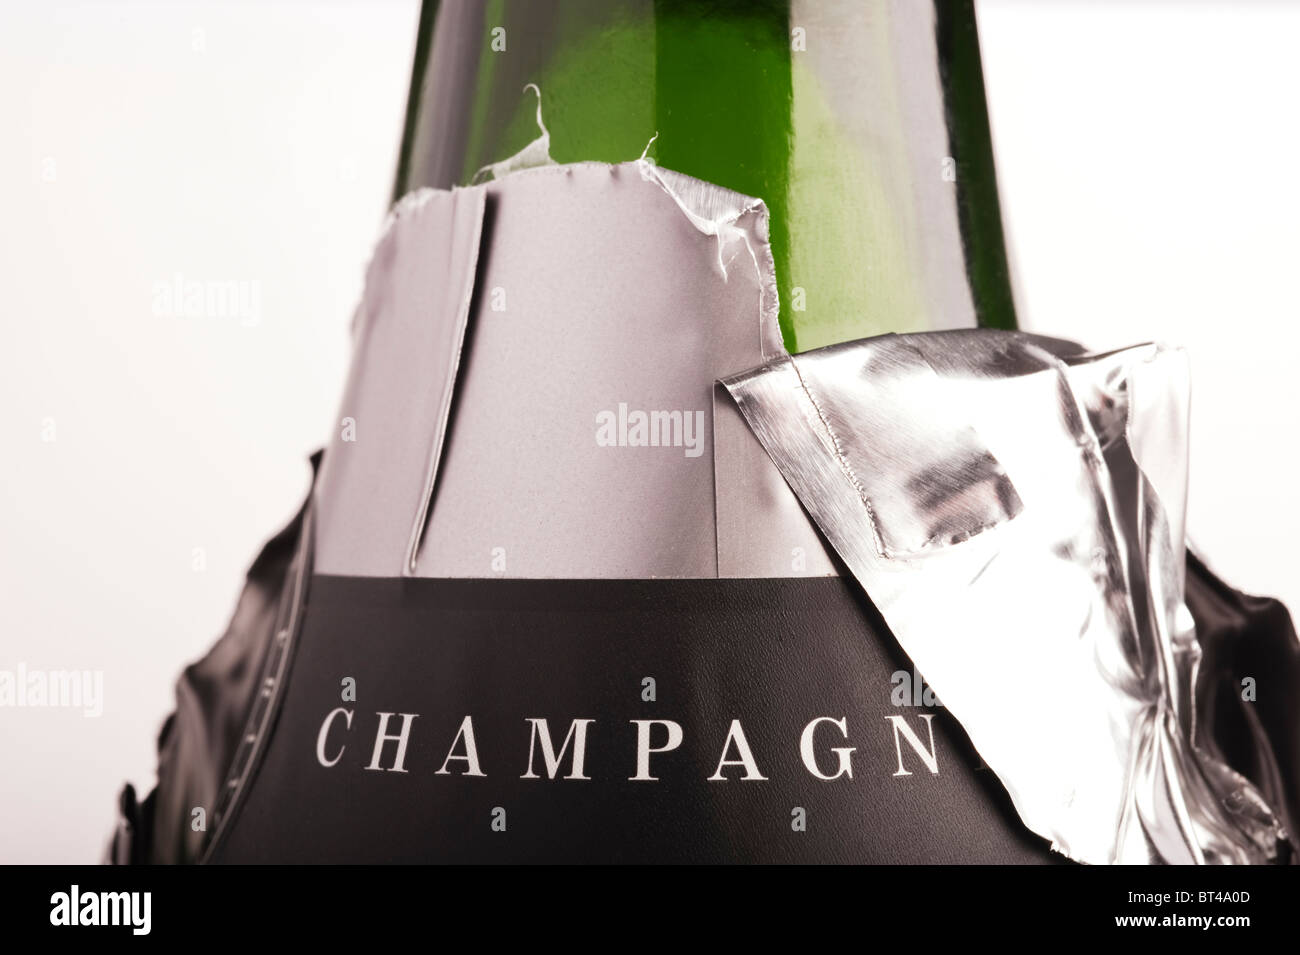 An opened champagne bottle foil neck label in closeup Stock Photo